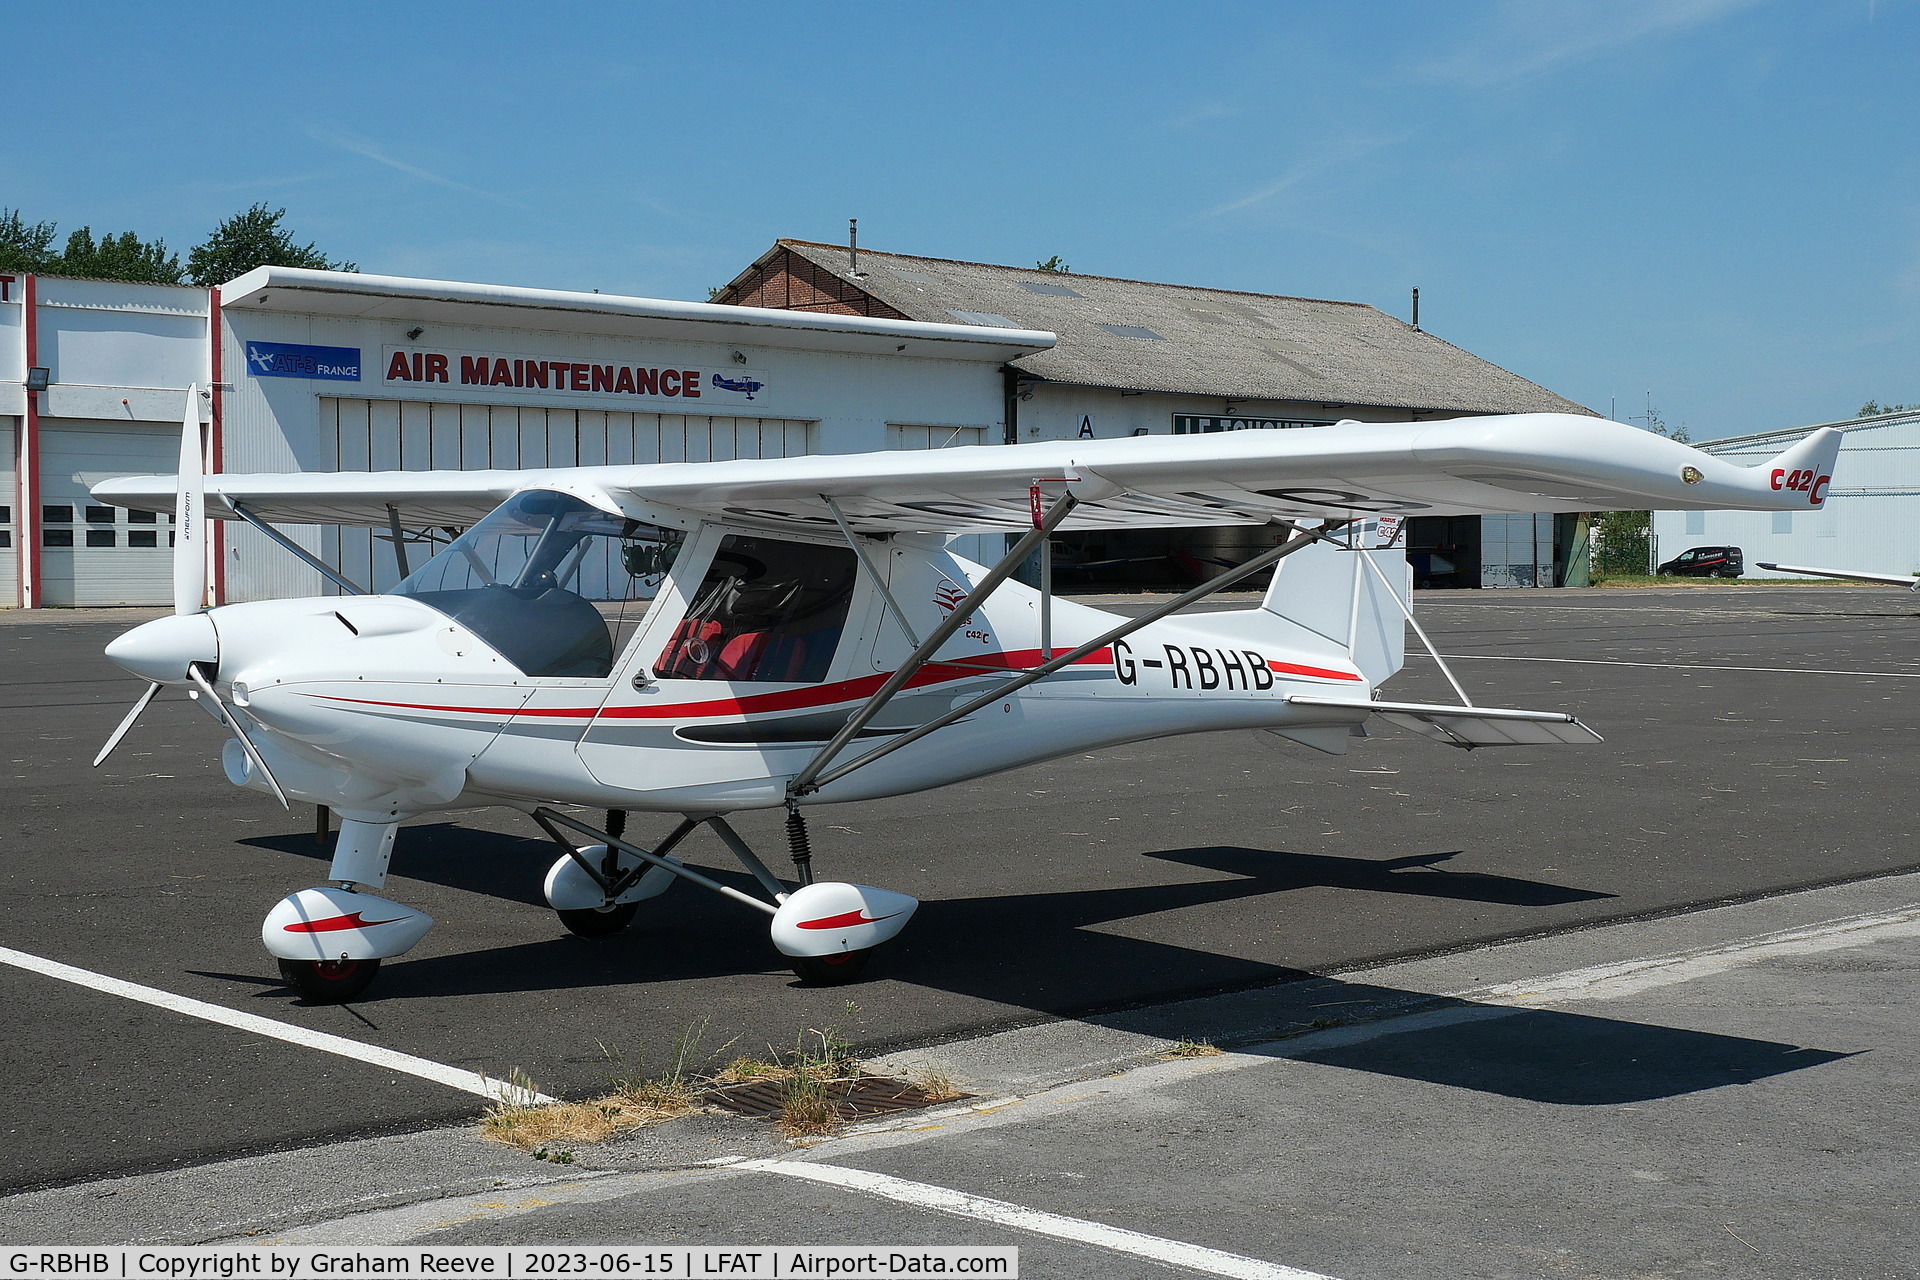 G-RBHB, 2021 Comco Ikarus C42 FB100 Charlie C/N 2108-7659, Parked at Le Touquet.